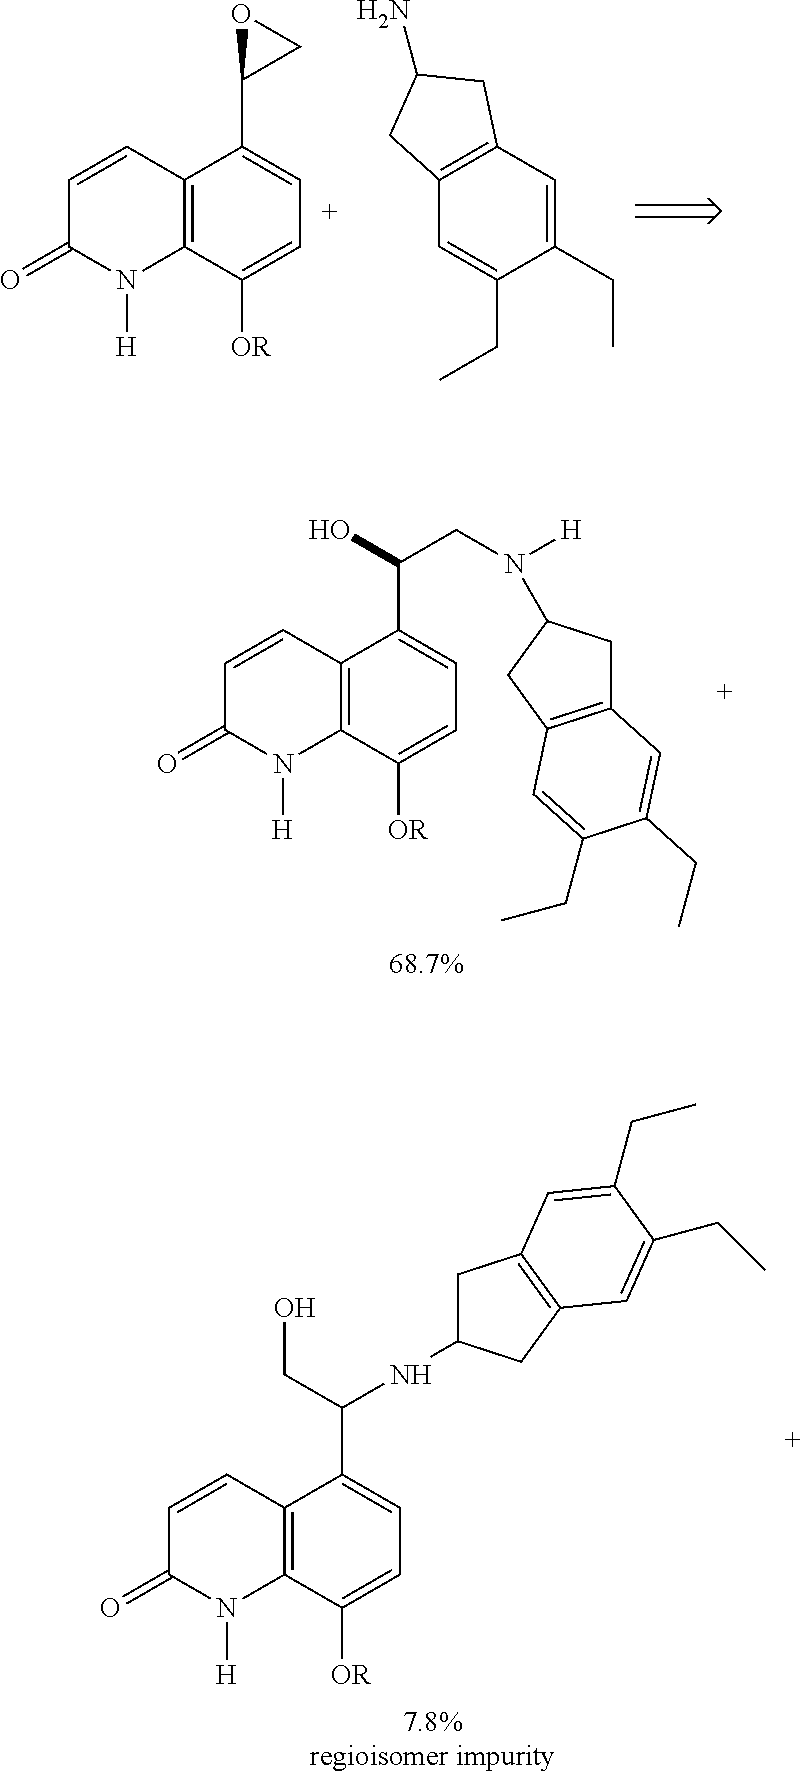 Methods for the preparation of indacaterol and pharmaceutically acceptable salts thereof